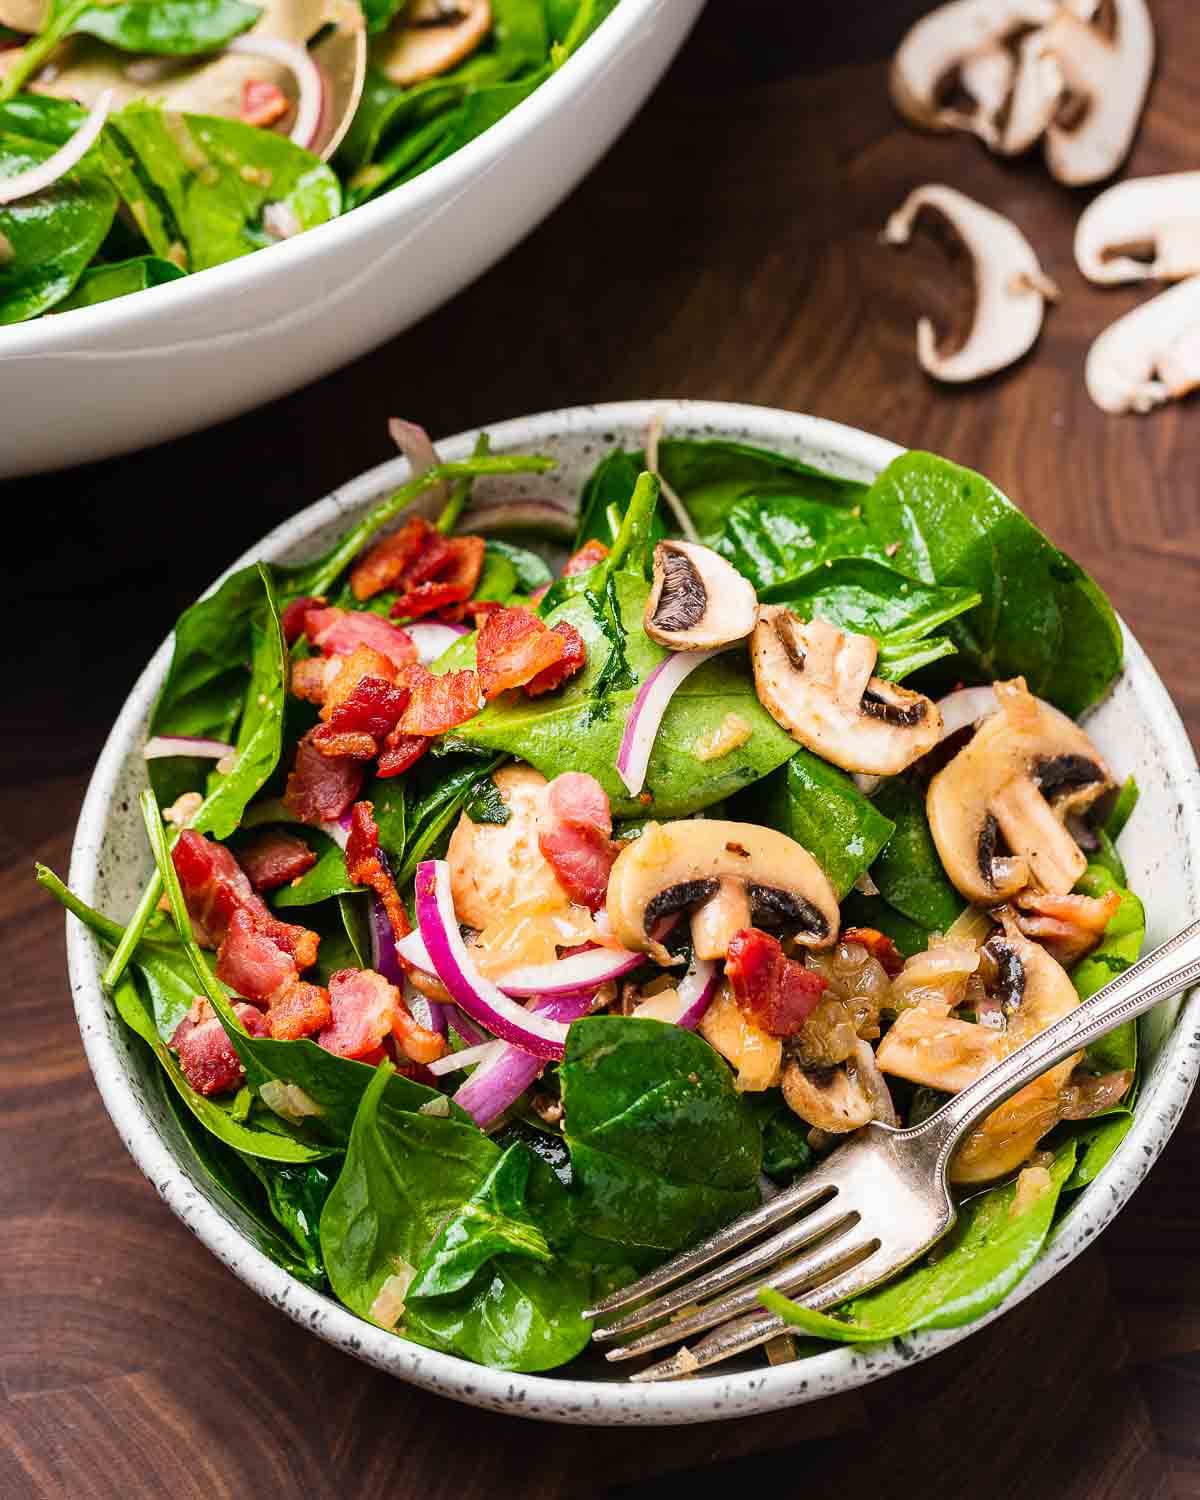 Spinach salad with hot bacon dressing in white bowl with mushrooms on the table.